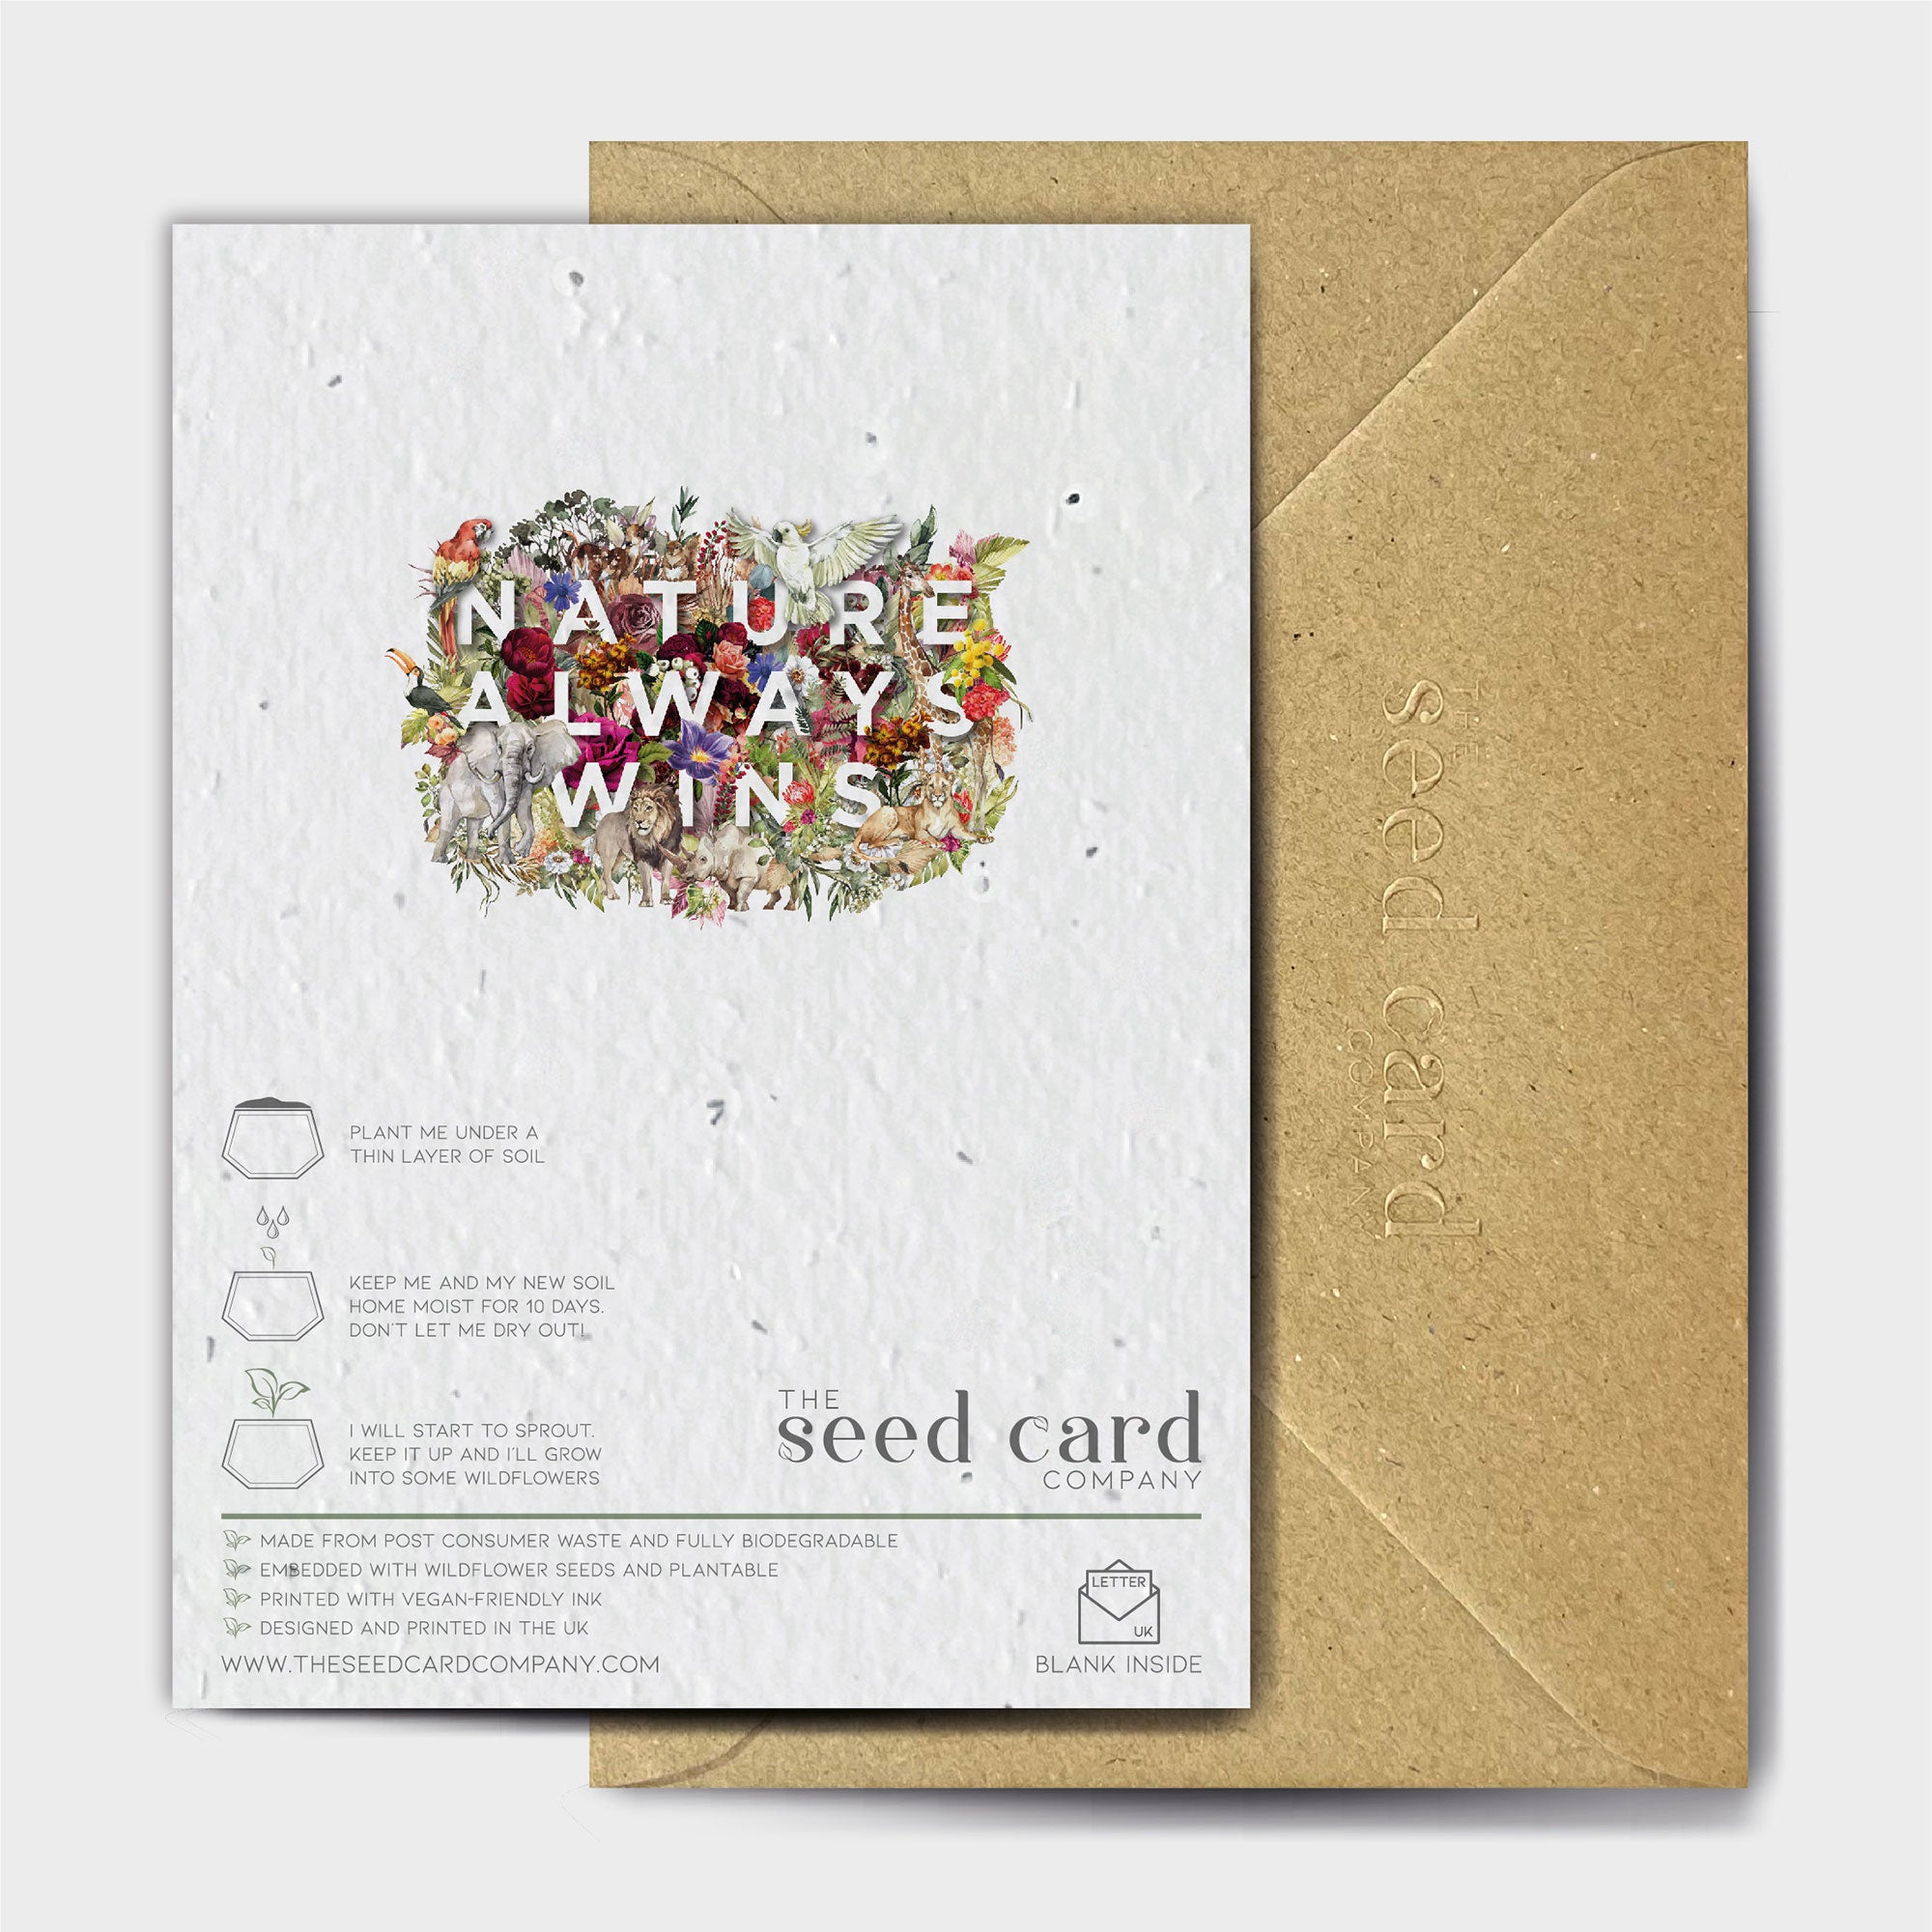 Shop online Calamine Collection - 100% biodegradable seed-embedded cards Shop -The Seed Card Company